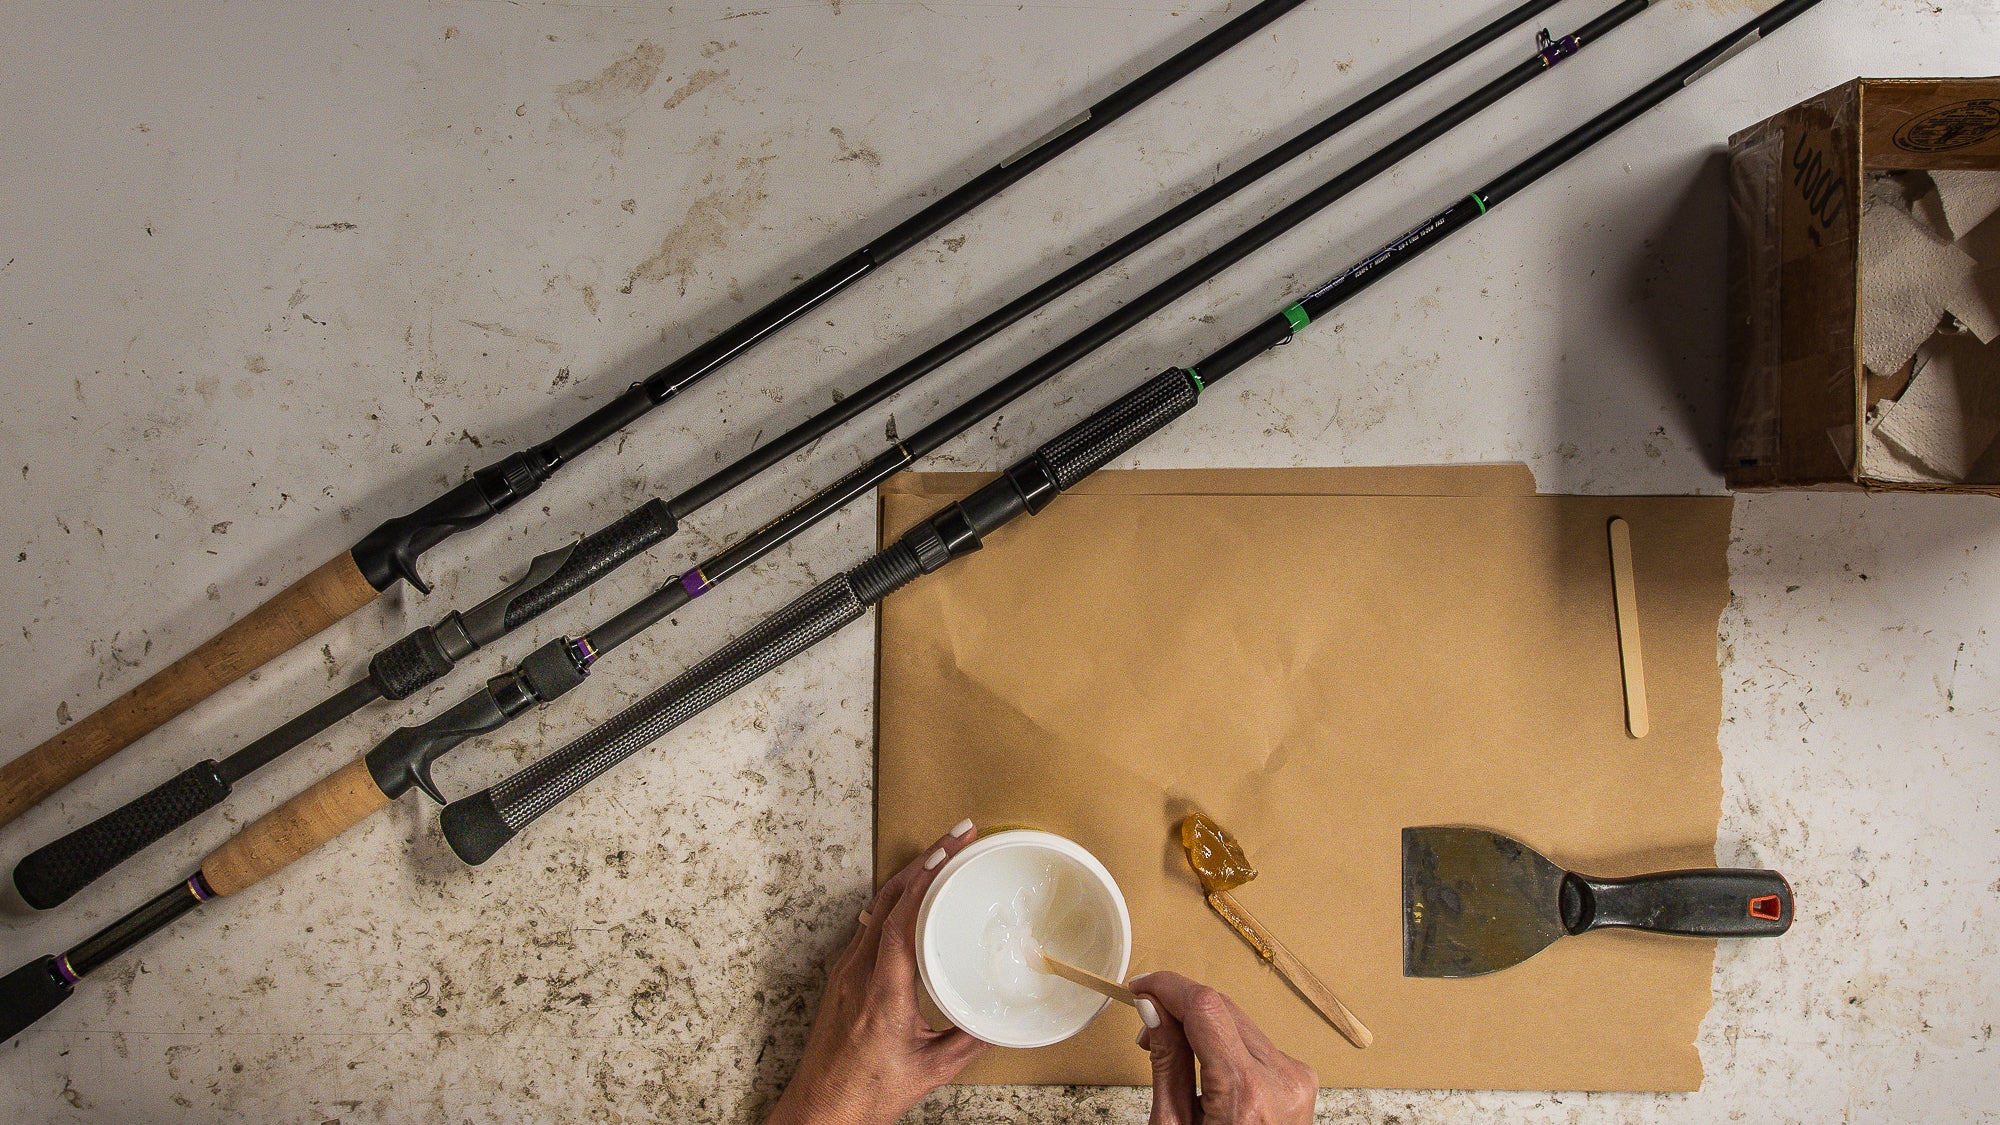 Bass Fishing Rods, Made in USA